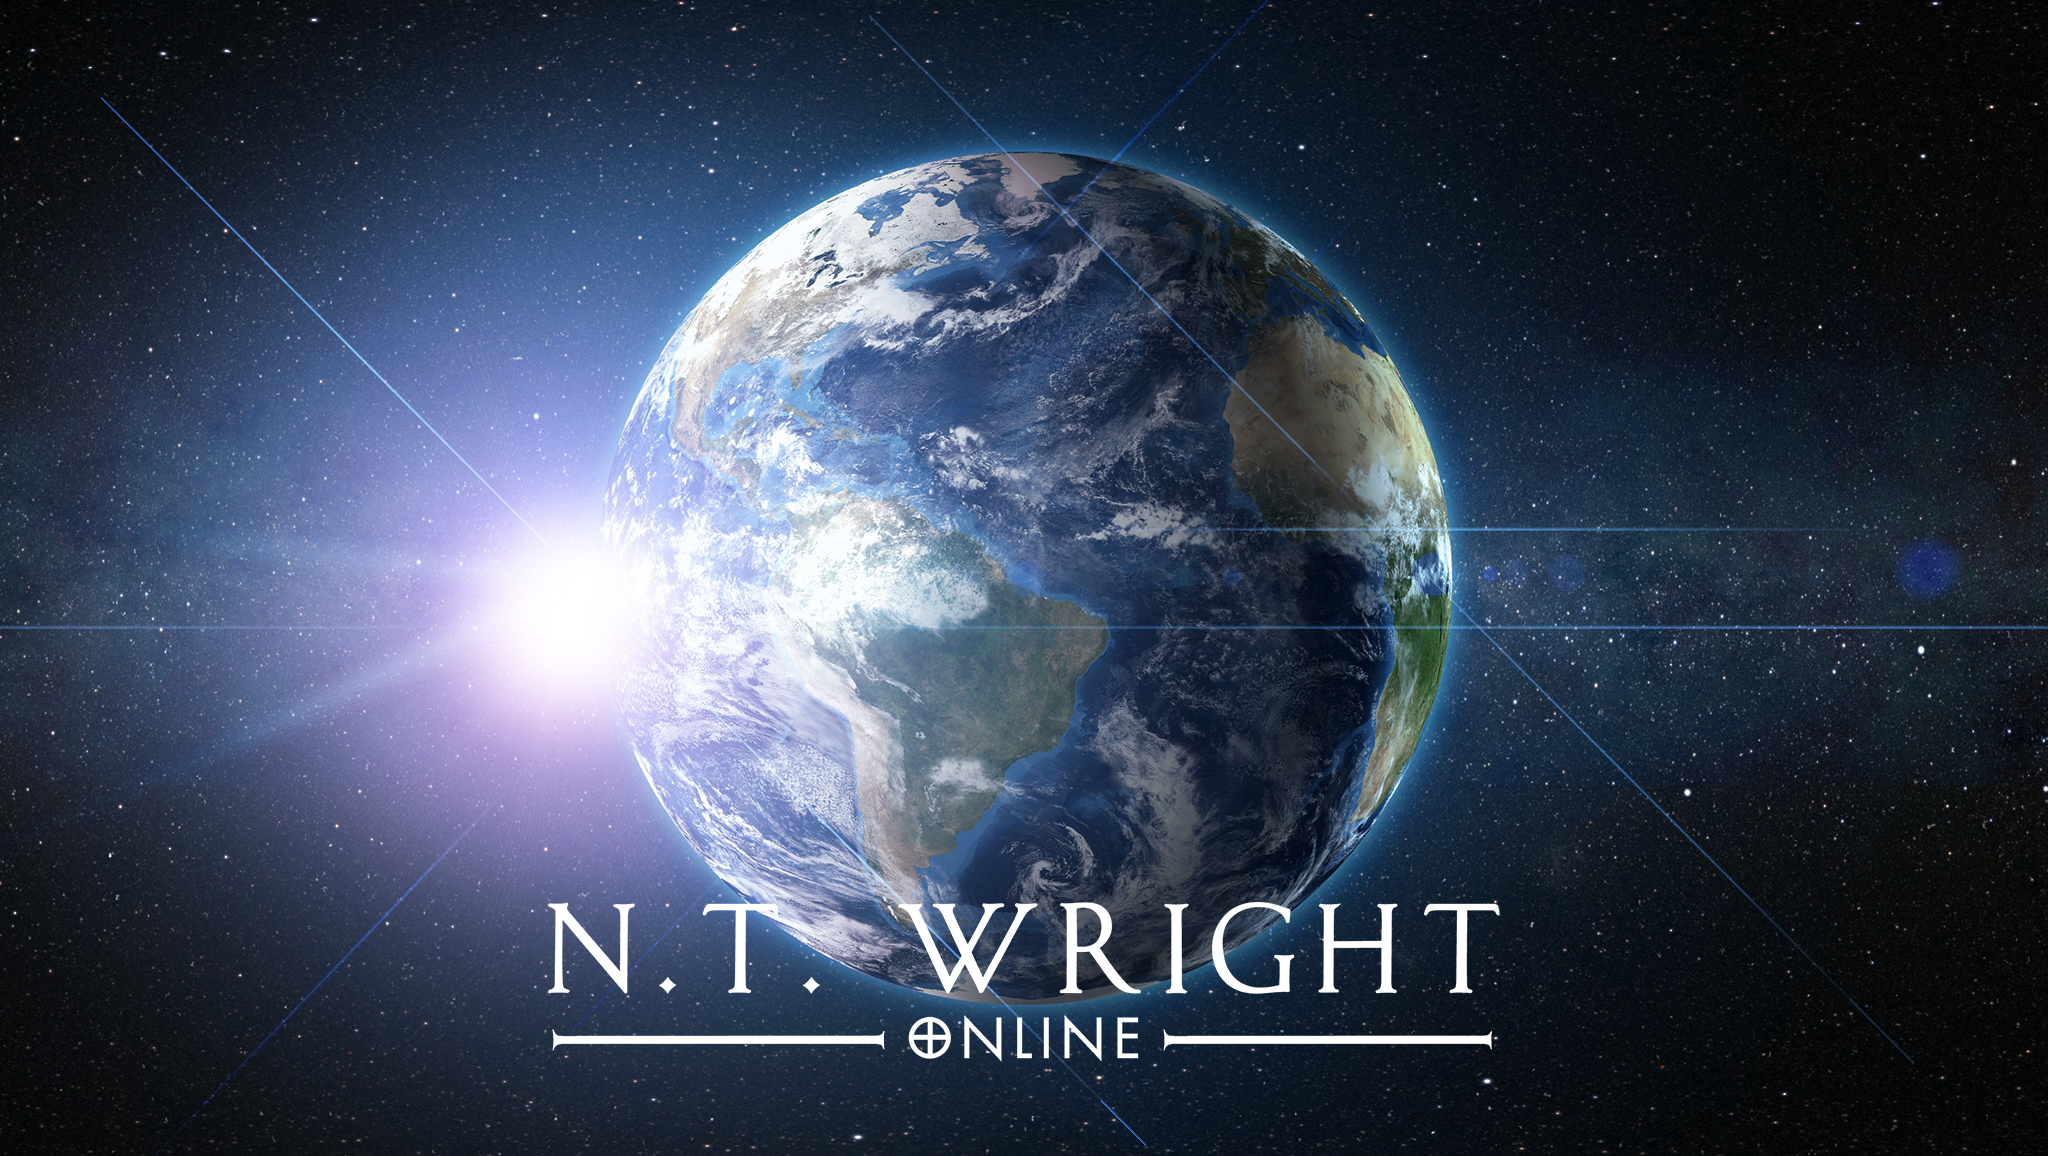 Book of Genesis: The Beginning | Online Course | N.T. Wright Online